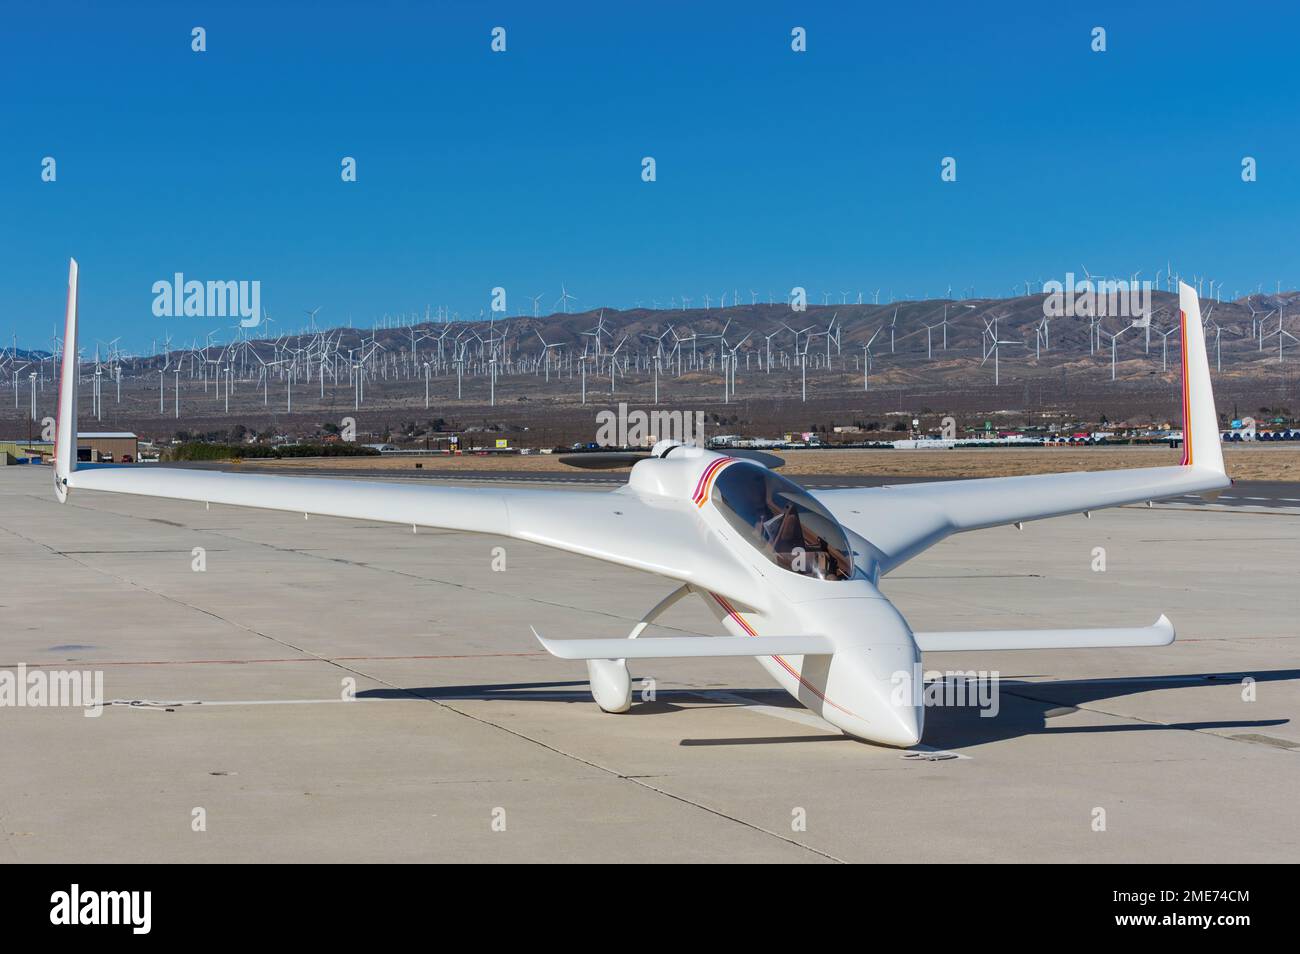 P1983 Kreidel Long EZ aircraft with registration N888EZ shown parked at Mojave Air and Space Port. Stock Photo